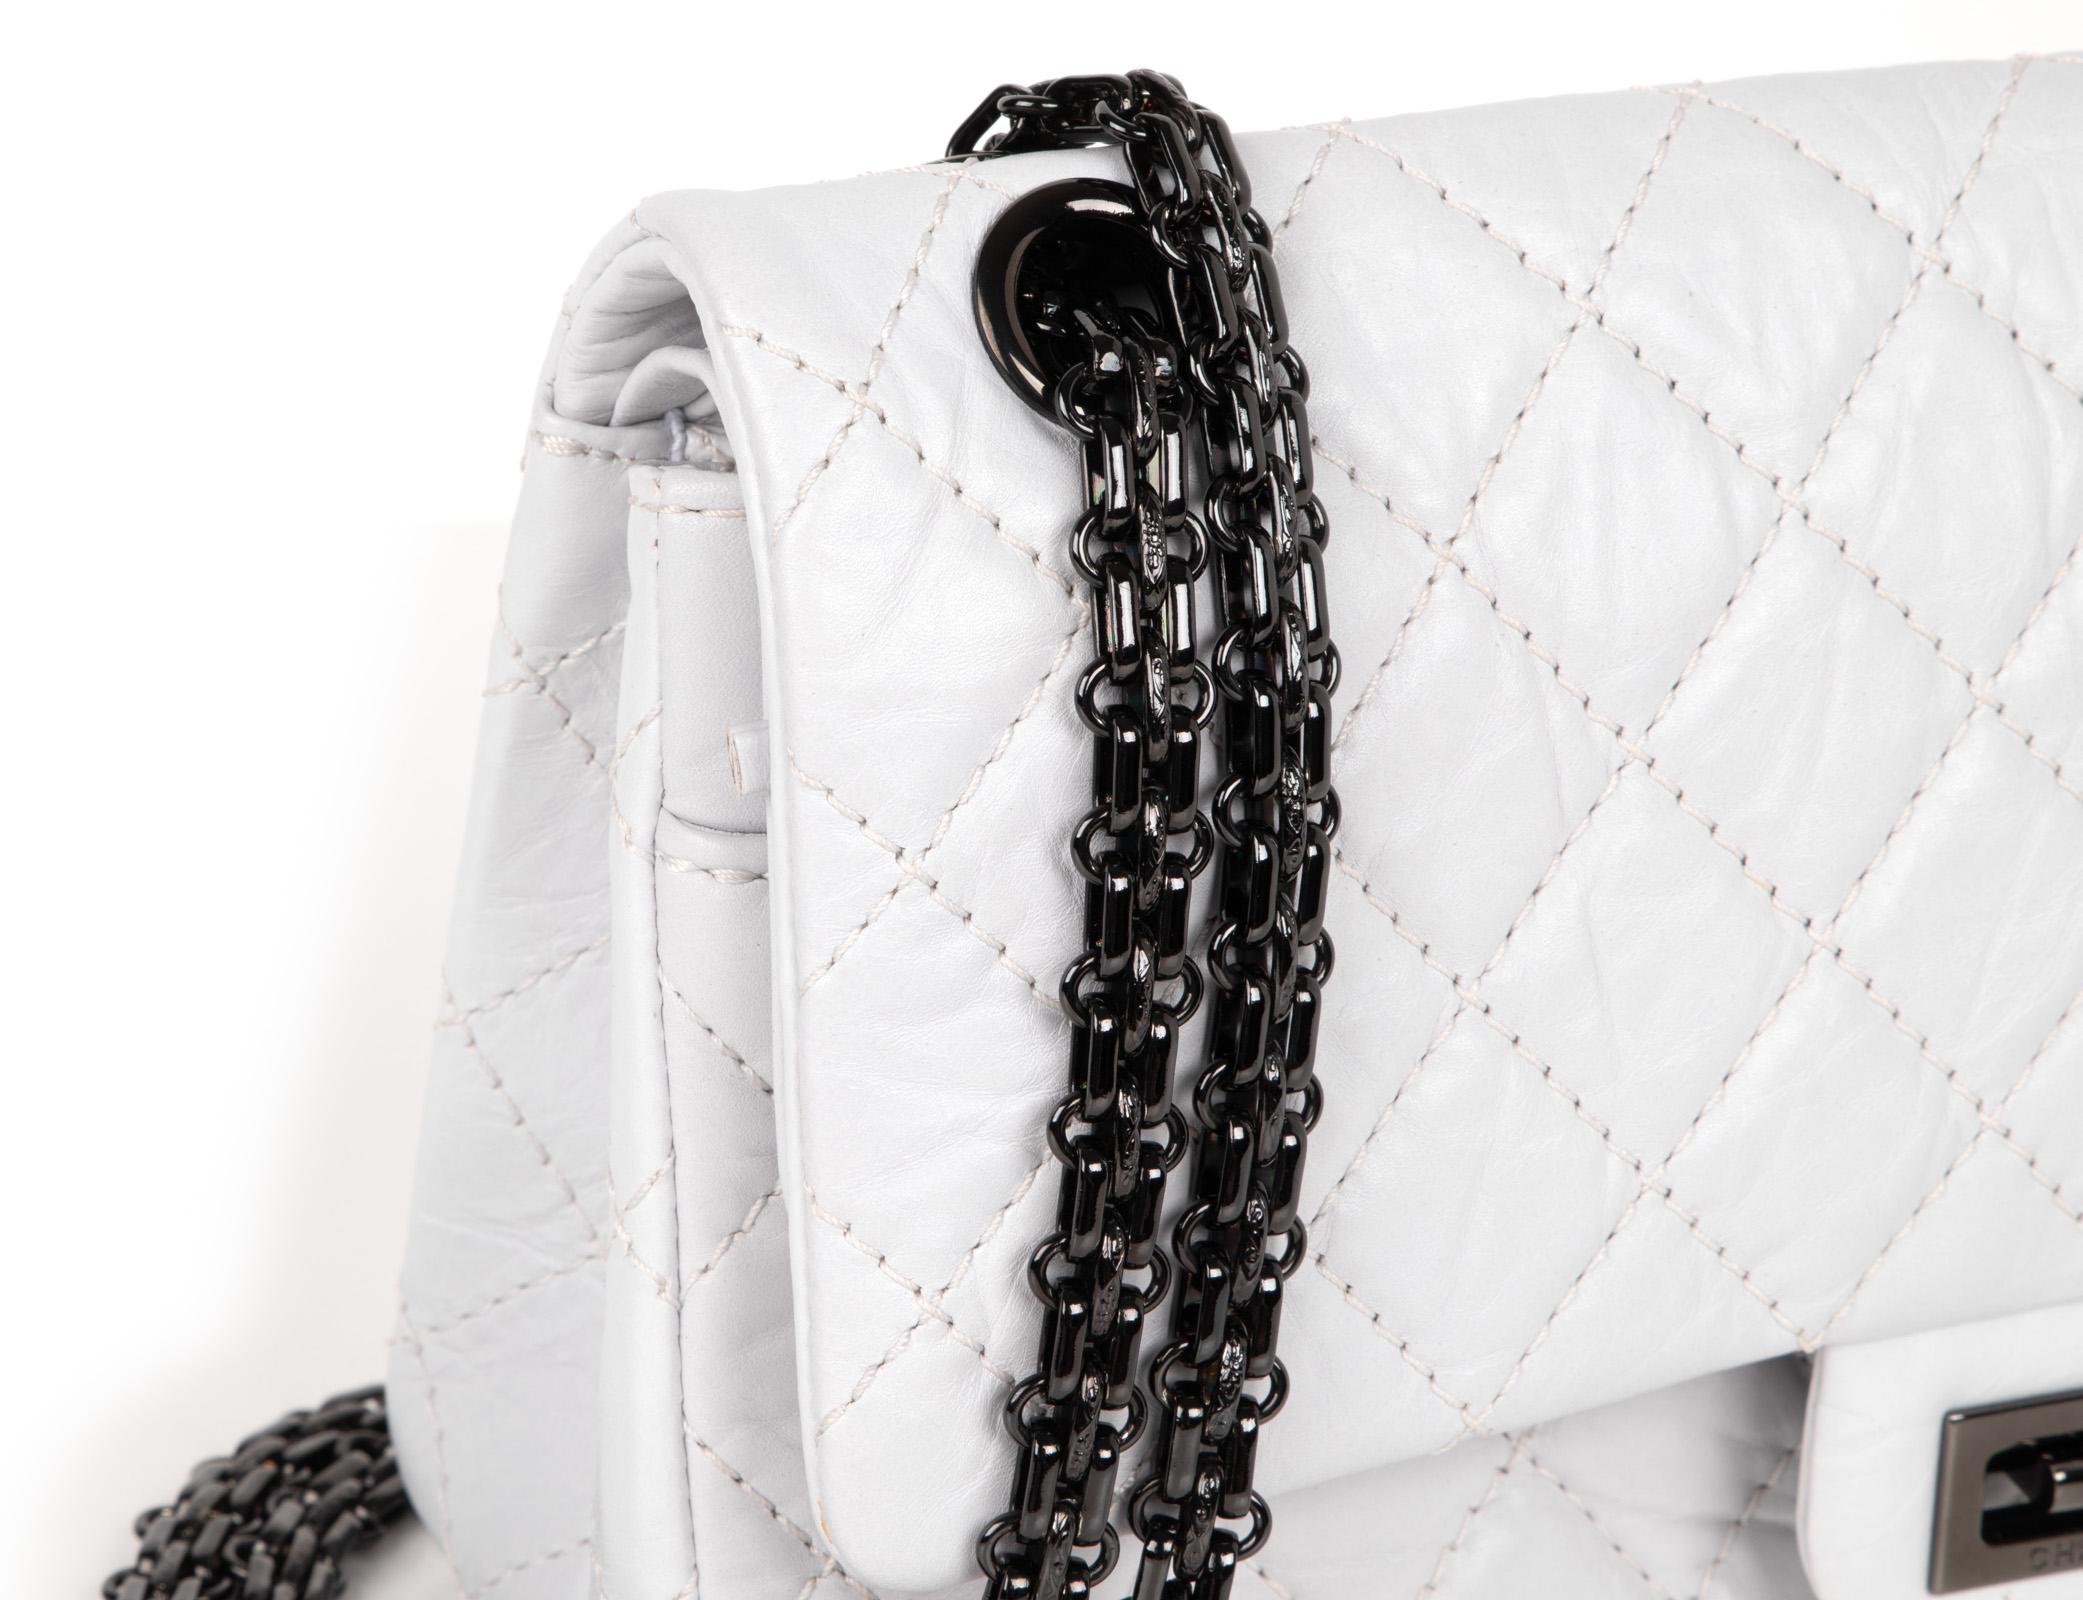 Chanel Small 2.55 double flap bag in unique chalk white distressed calfskin leather.  
Hematite logo embossed Mademoiselle turnkey and link chain strap which can be doubled.
Rear exterior slot pocket.
Signature CHANEL stamp inside the bag. 
Comes